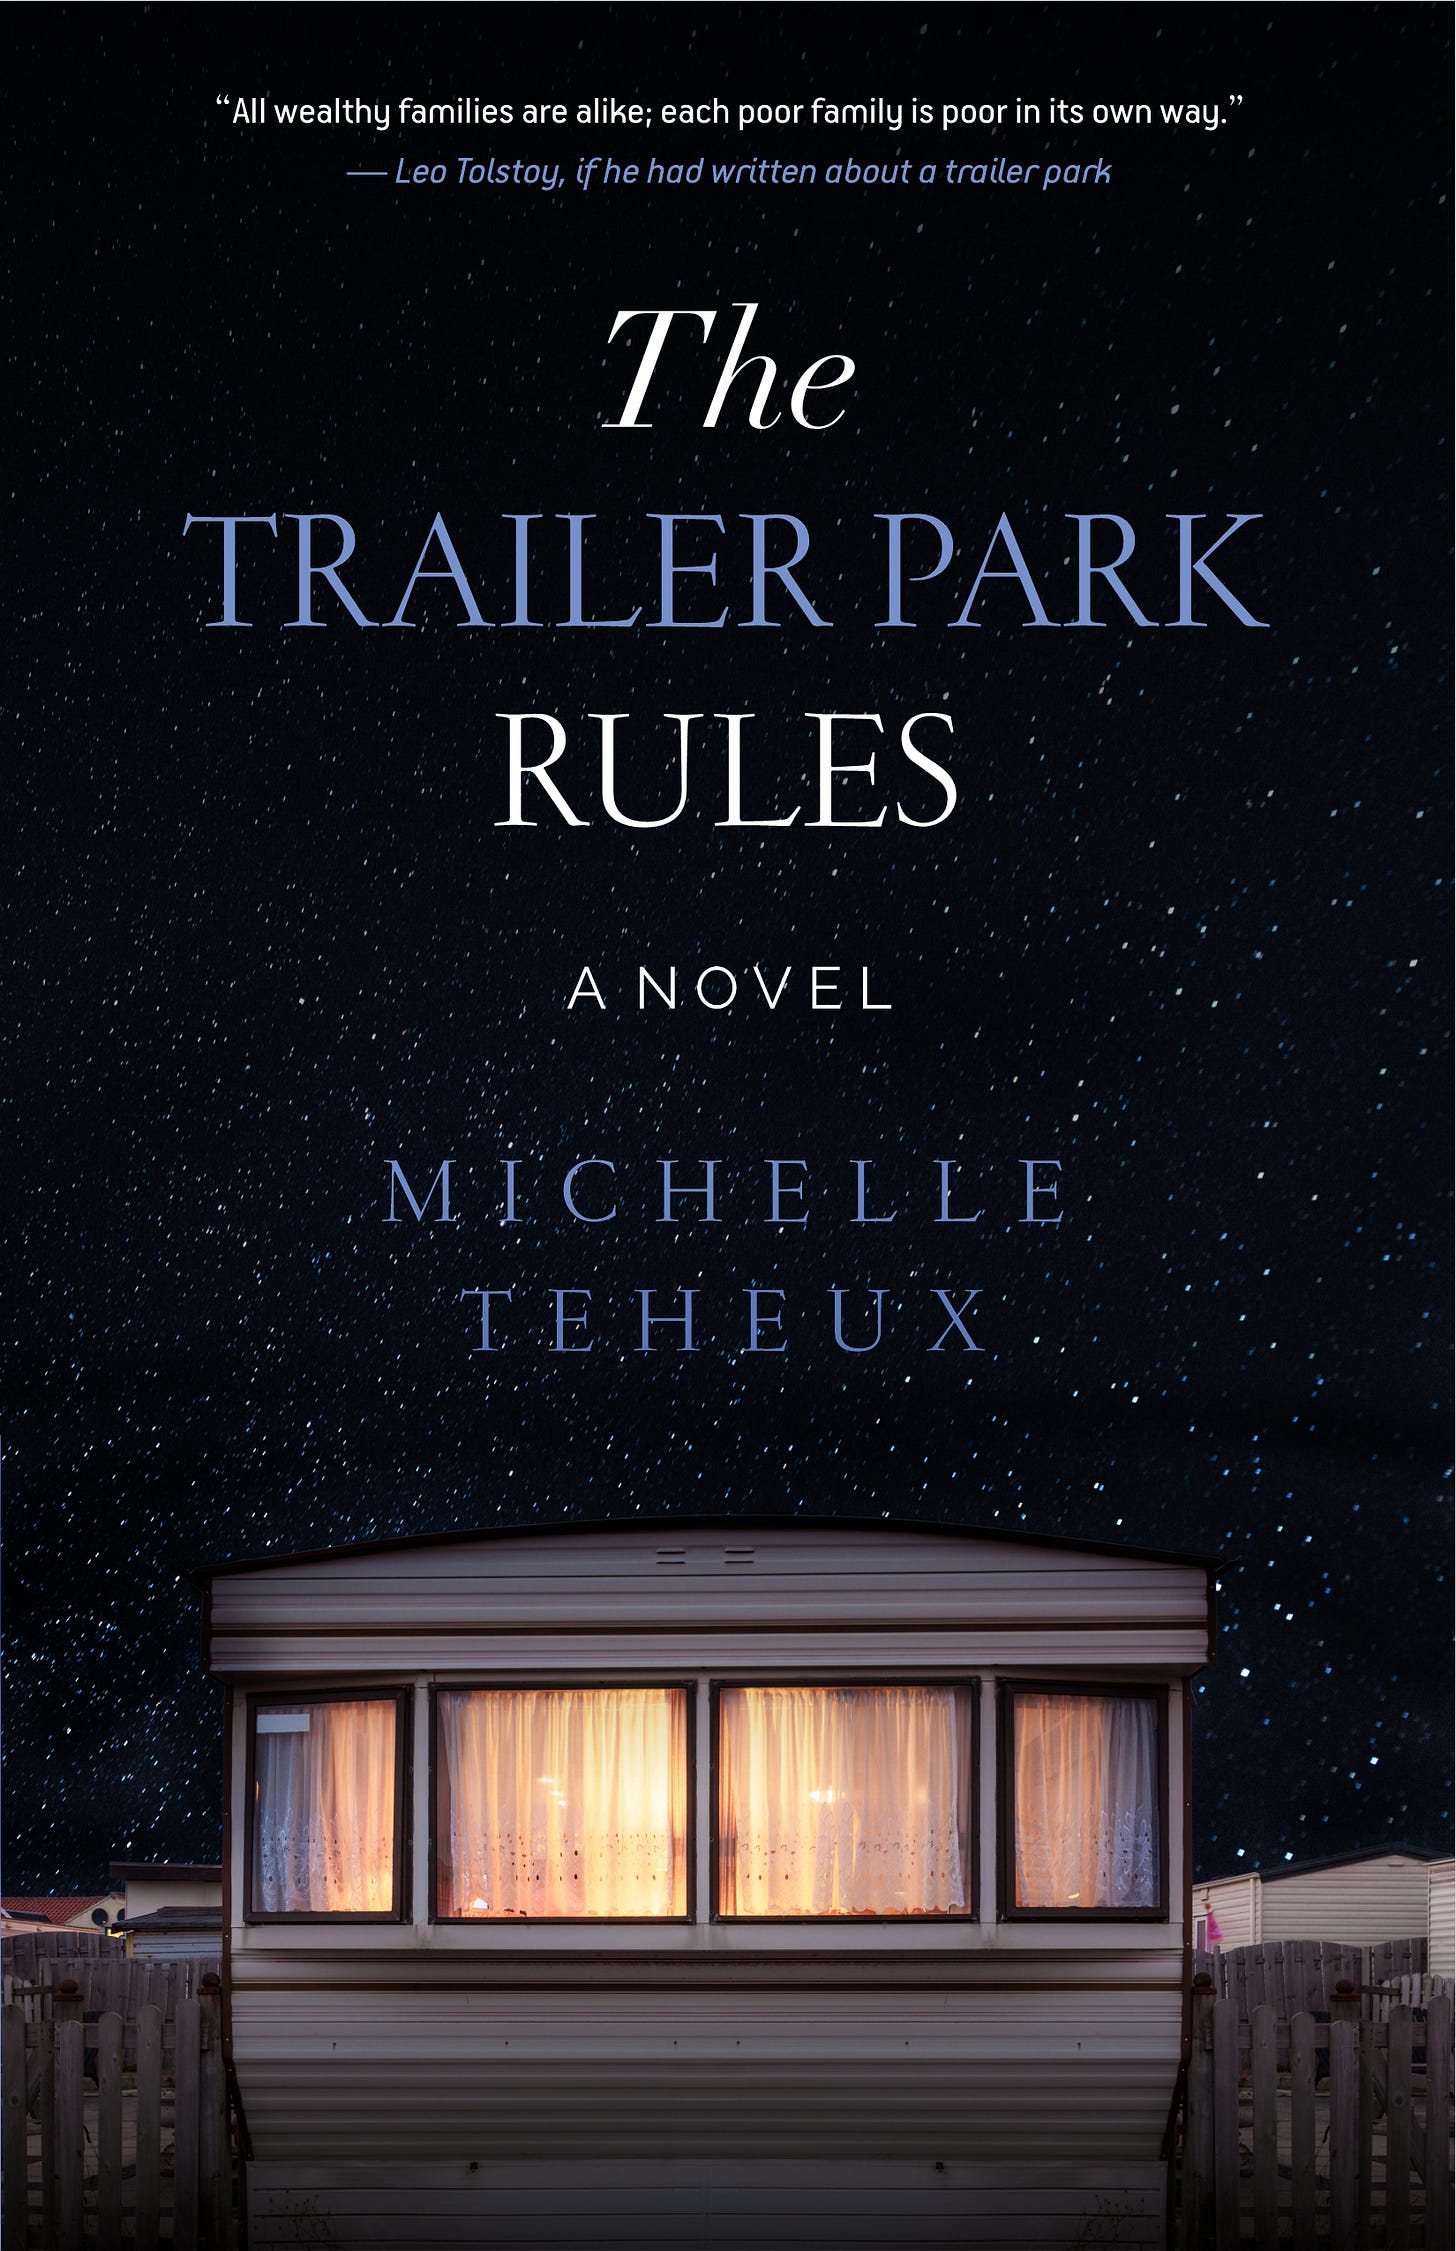 The cover of The Trailer Park Rules by Michelle Teheux